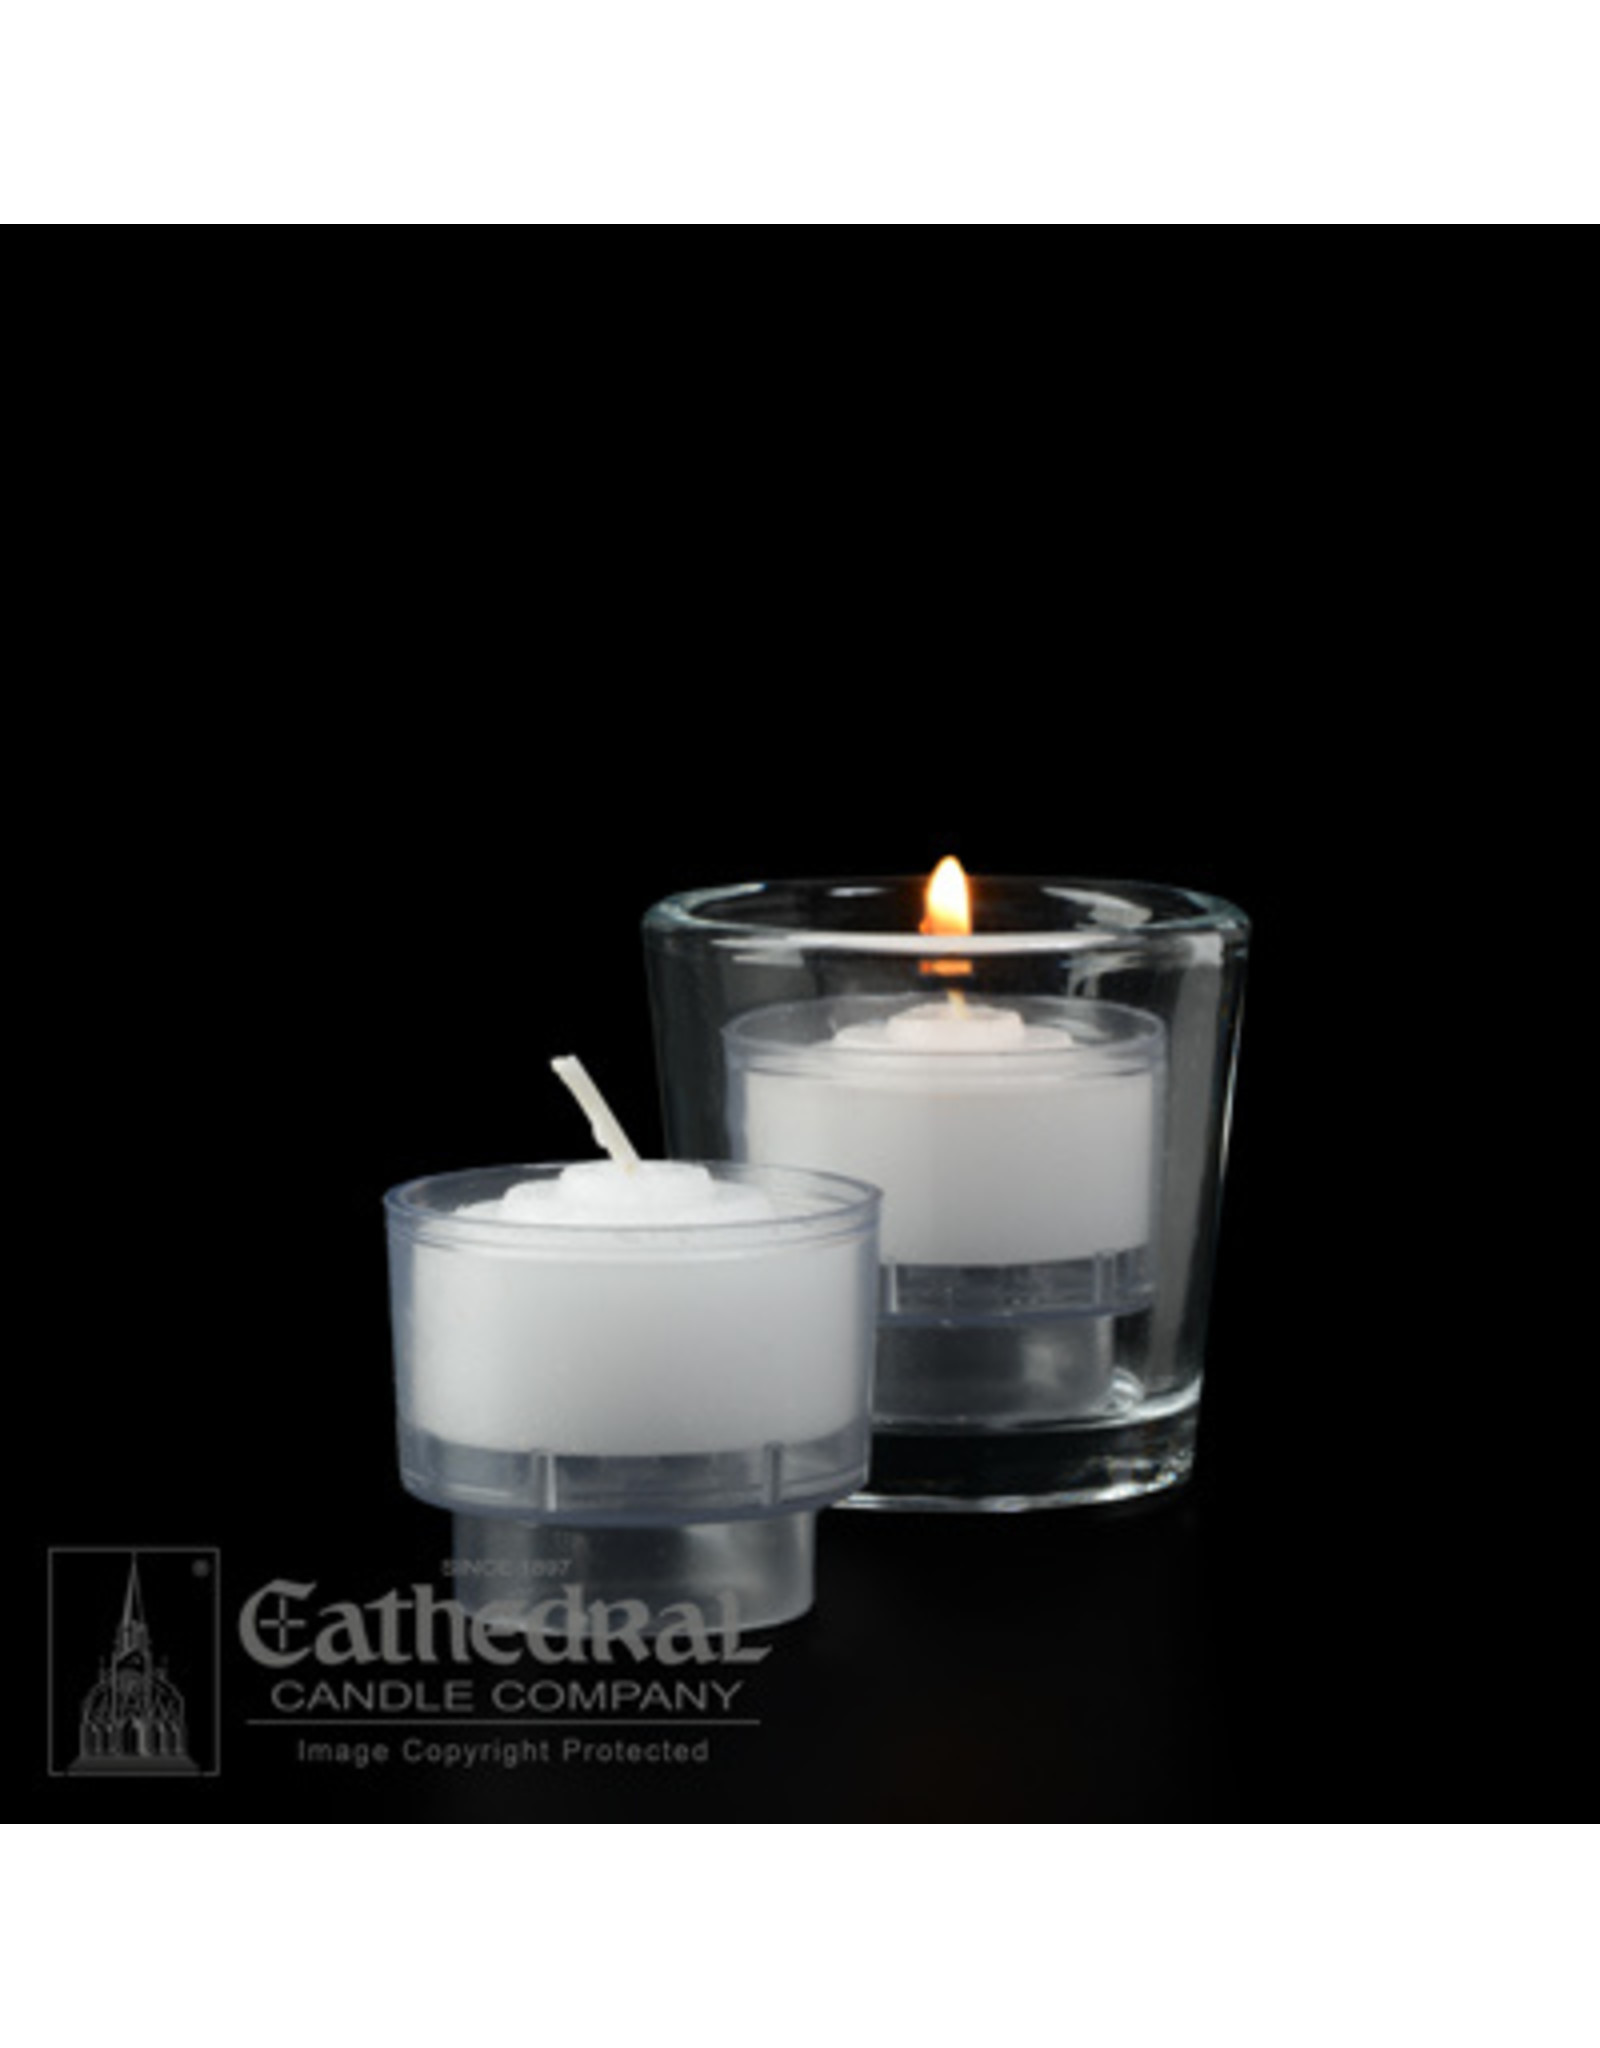 Cathedral Candle 4-Hour Crystal (Clear) Votive ez-Lite Candles (Case of 2 Boxes)